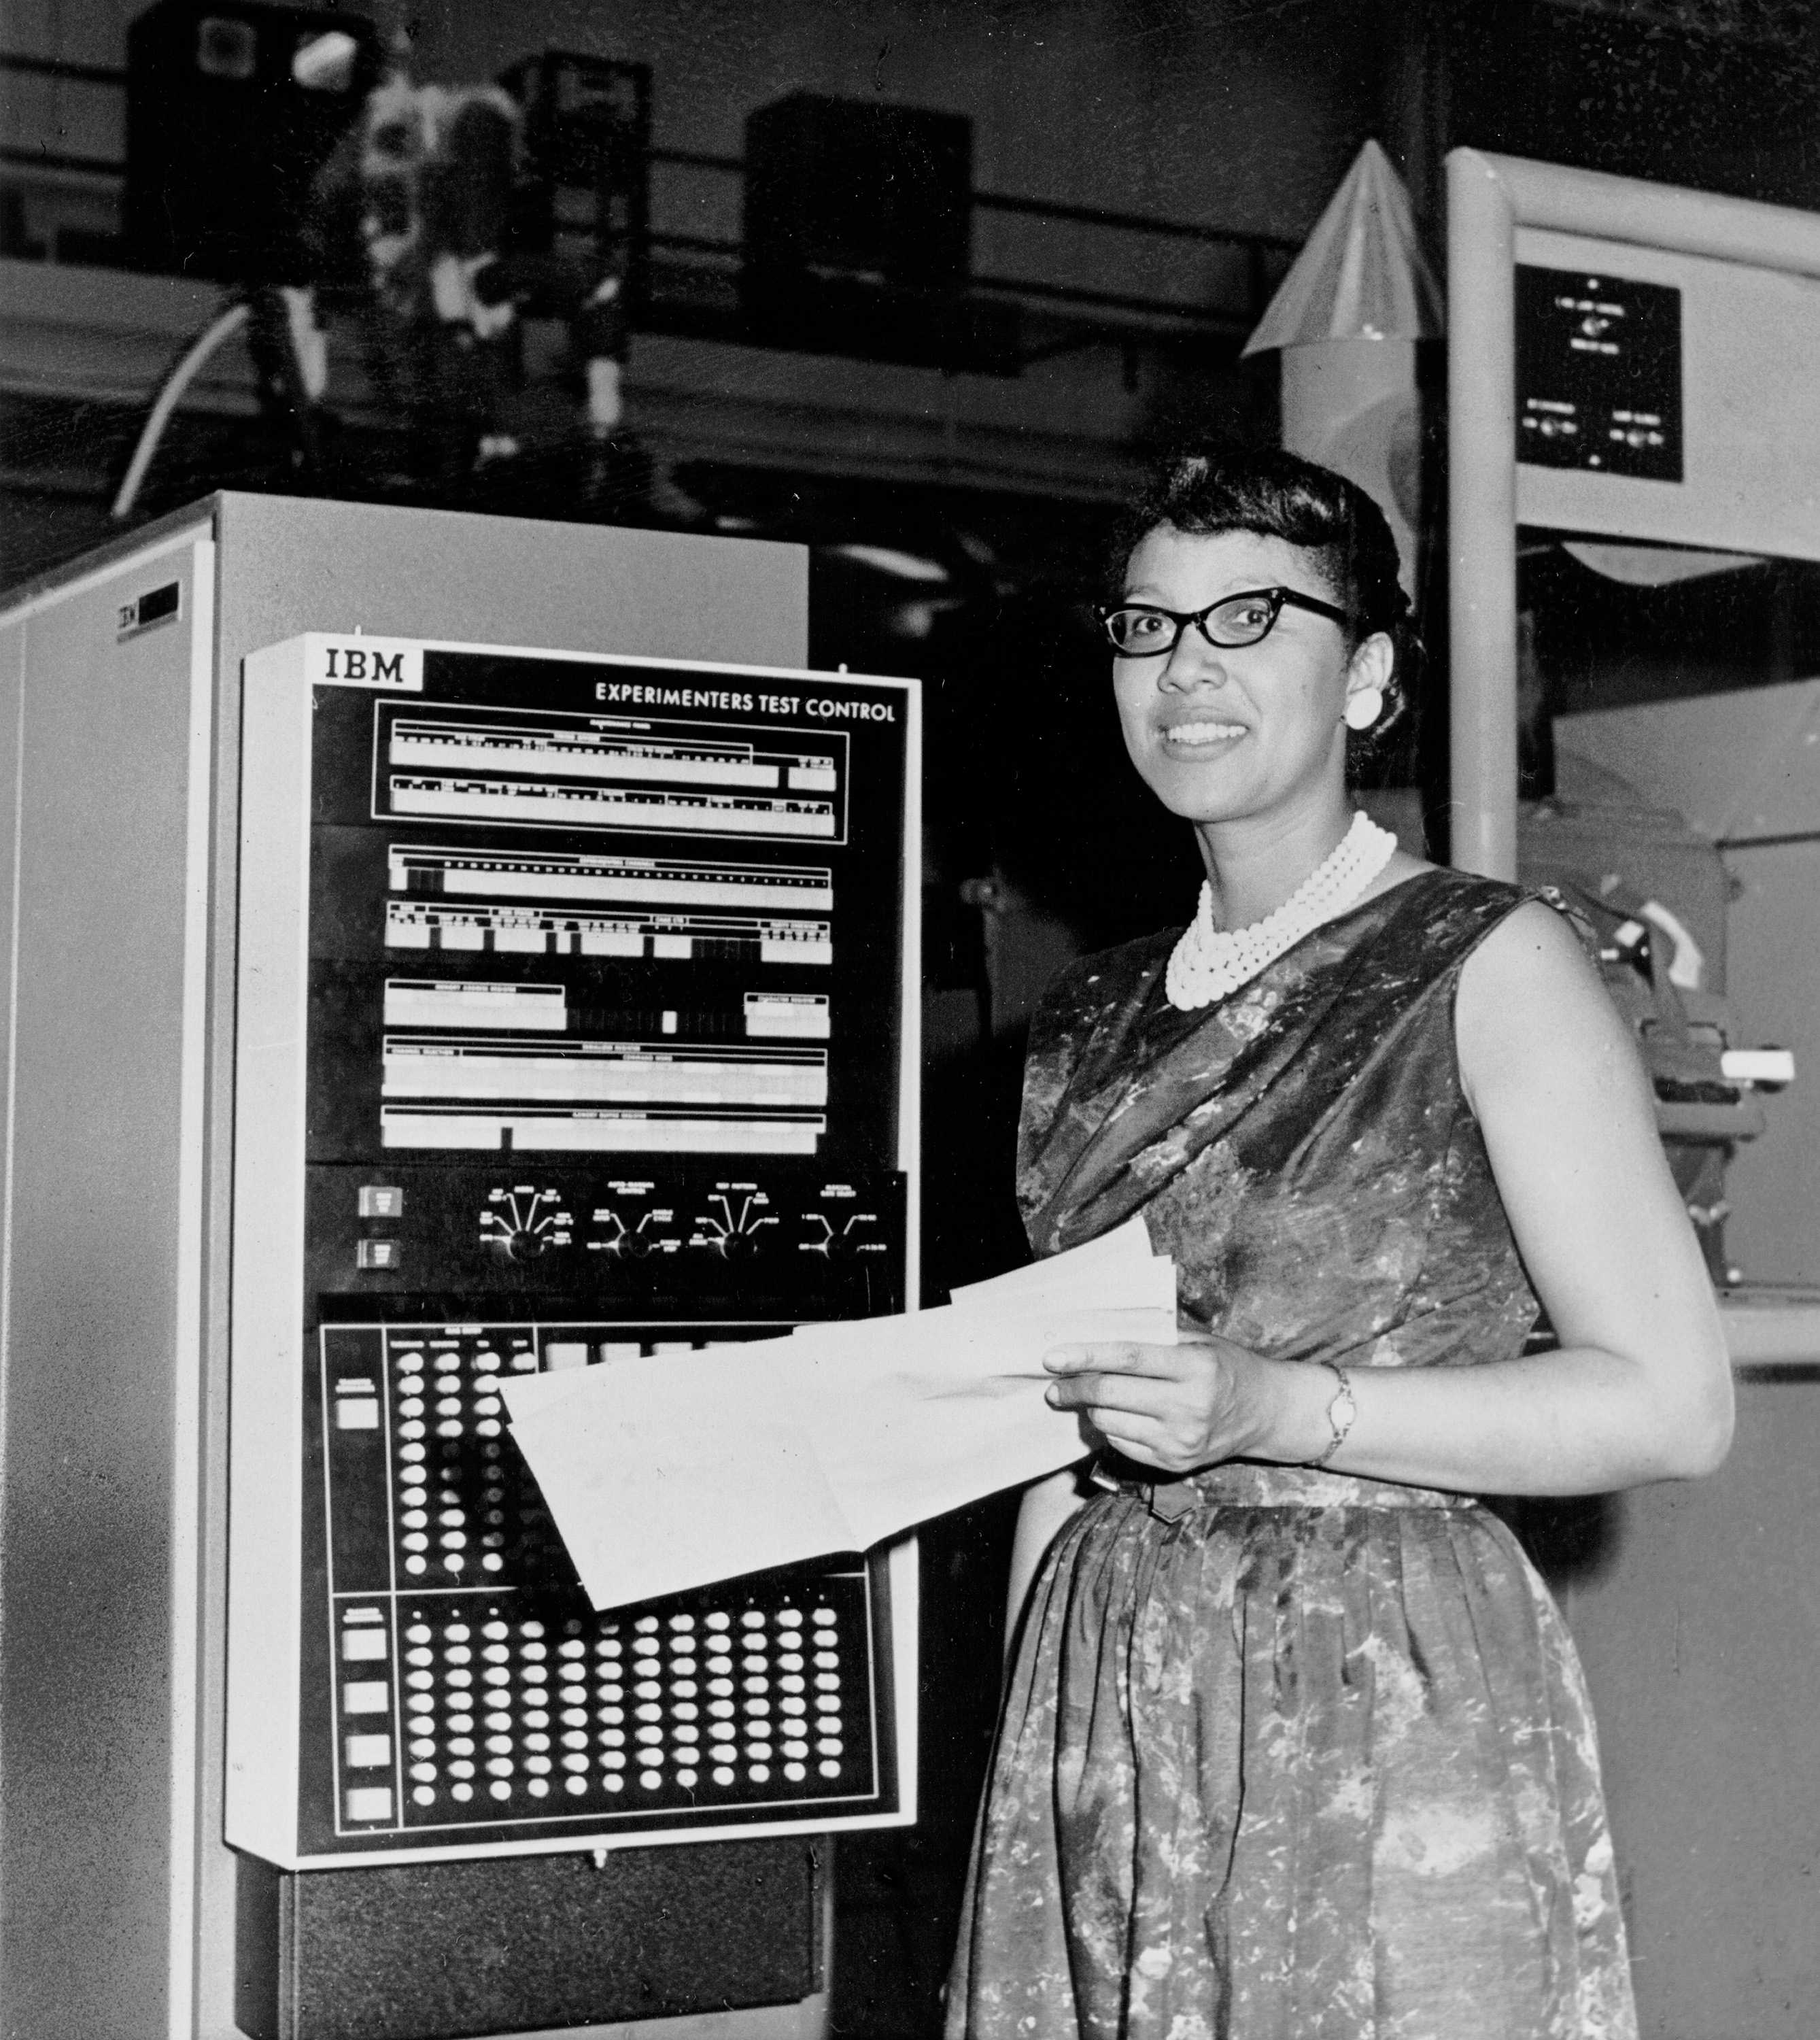 Melba Roy Mouten is holding paper in front of some machines as she smiling for a black and white photograph